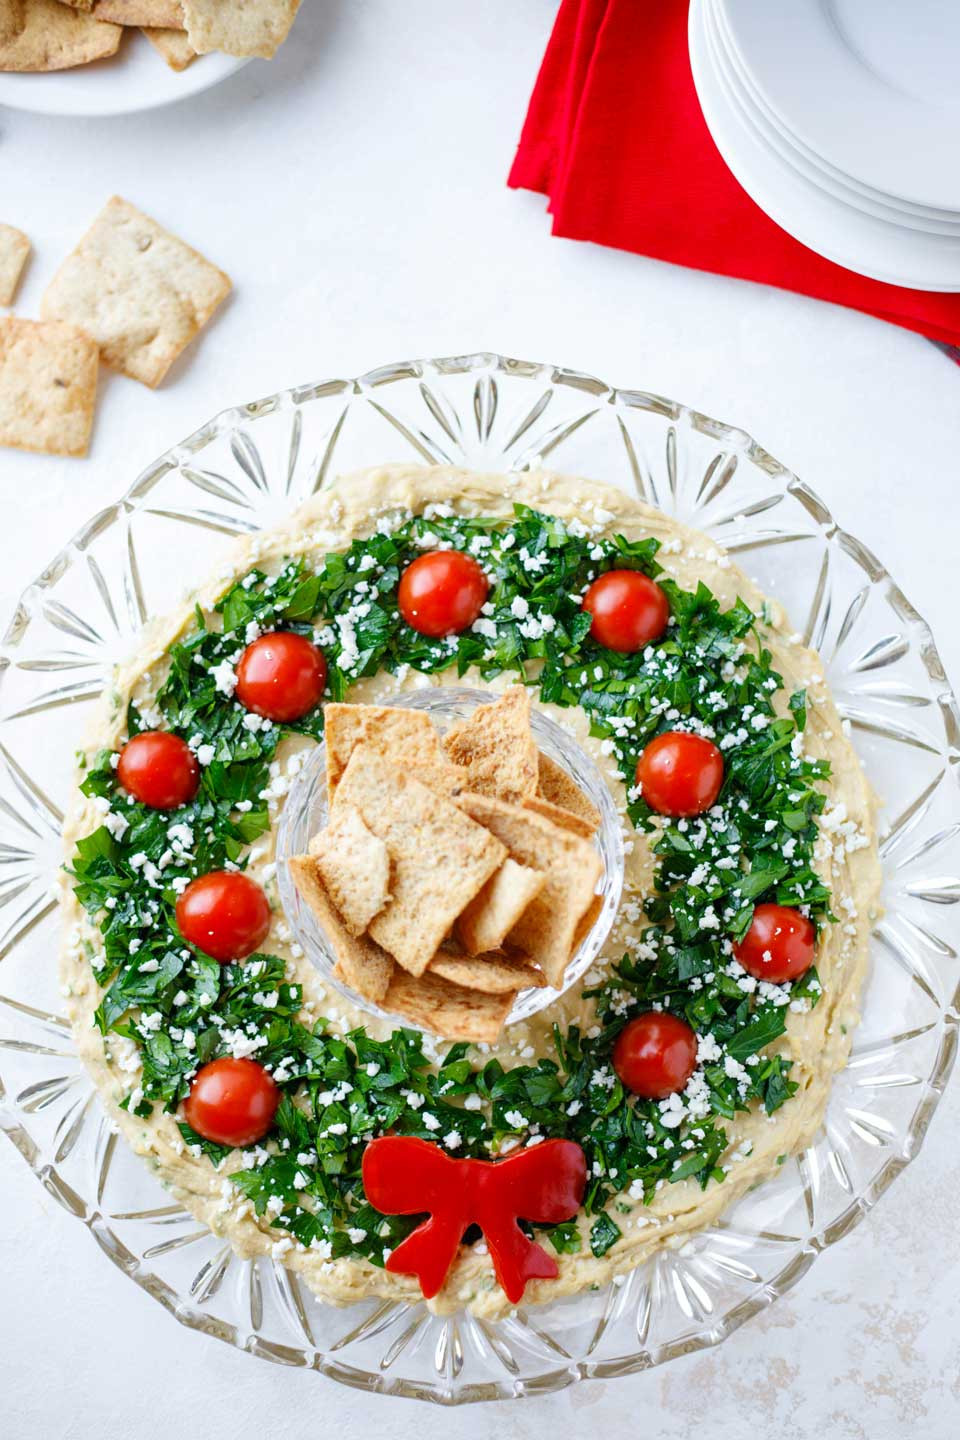 Easy Christmas Appetizers Recipes
 Easy Christmas Appetizer "Hummus Wreath" Two Healthy